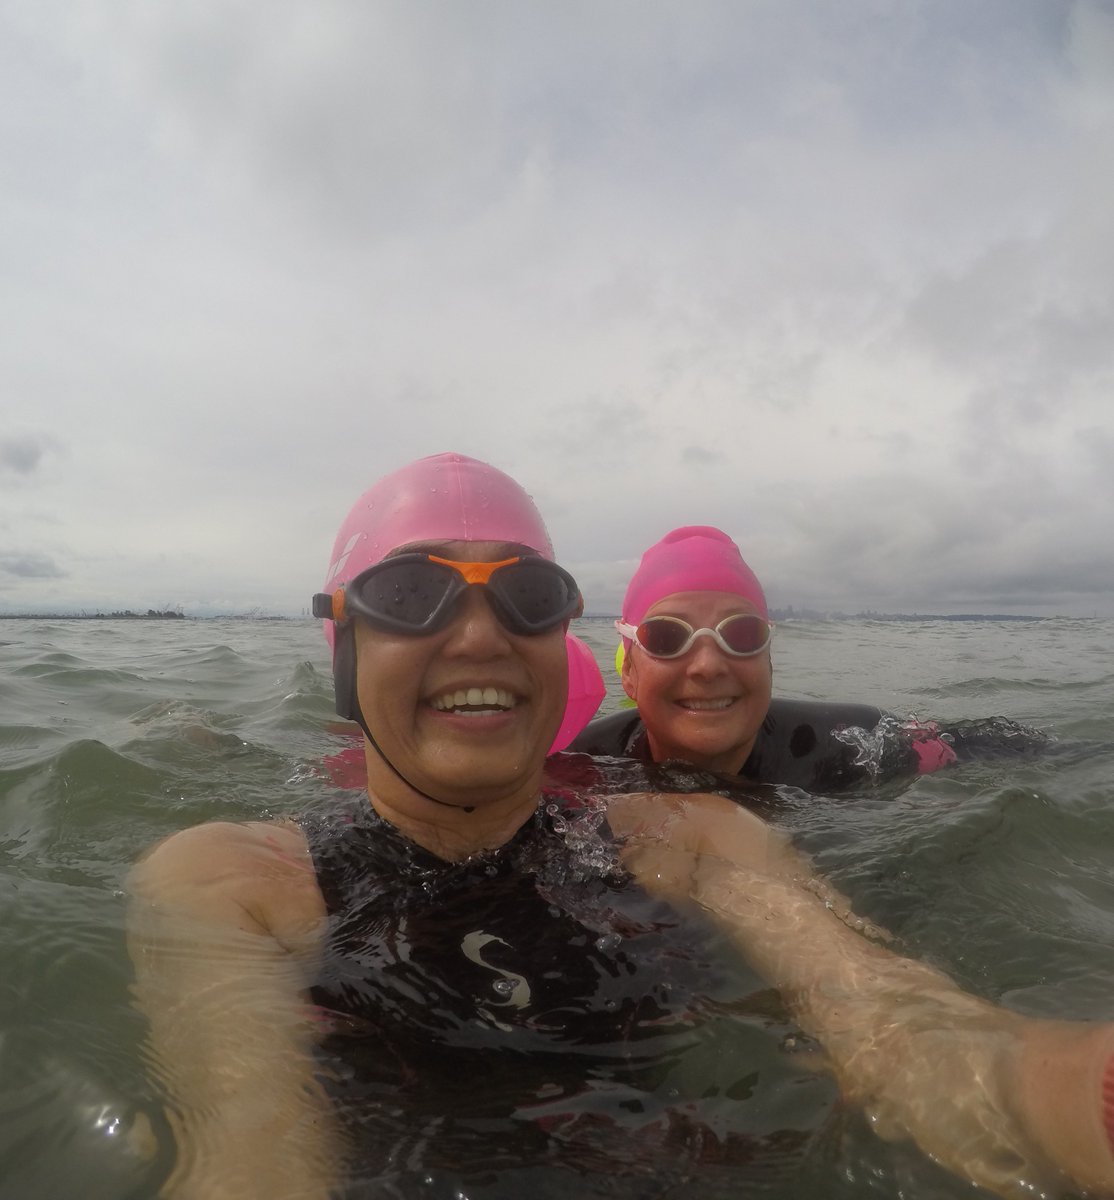 #buoyselfie pics from our 4/14 Sunday Berkeley swim. 

Come out and join us! Learn more and register here: odysseyopenwater.com/berkeley

#openwaterswimming #berkeleyswim #bayswim